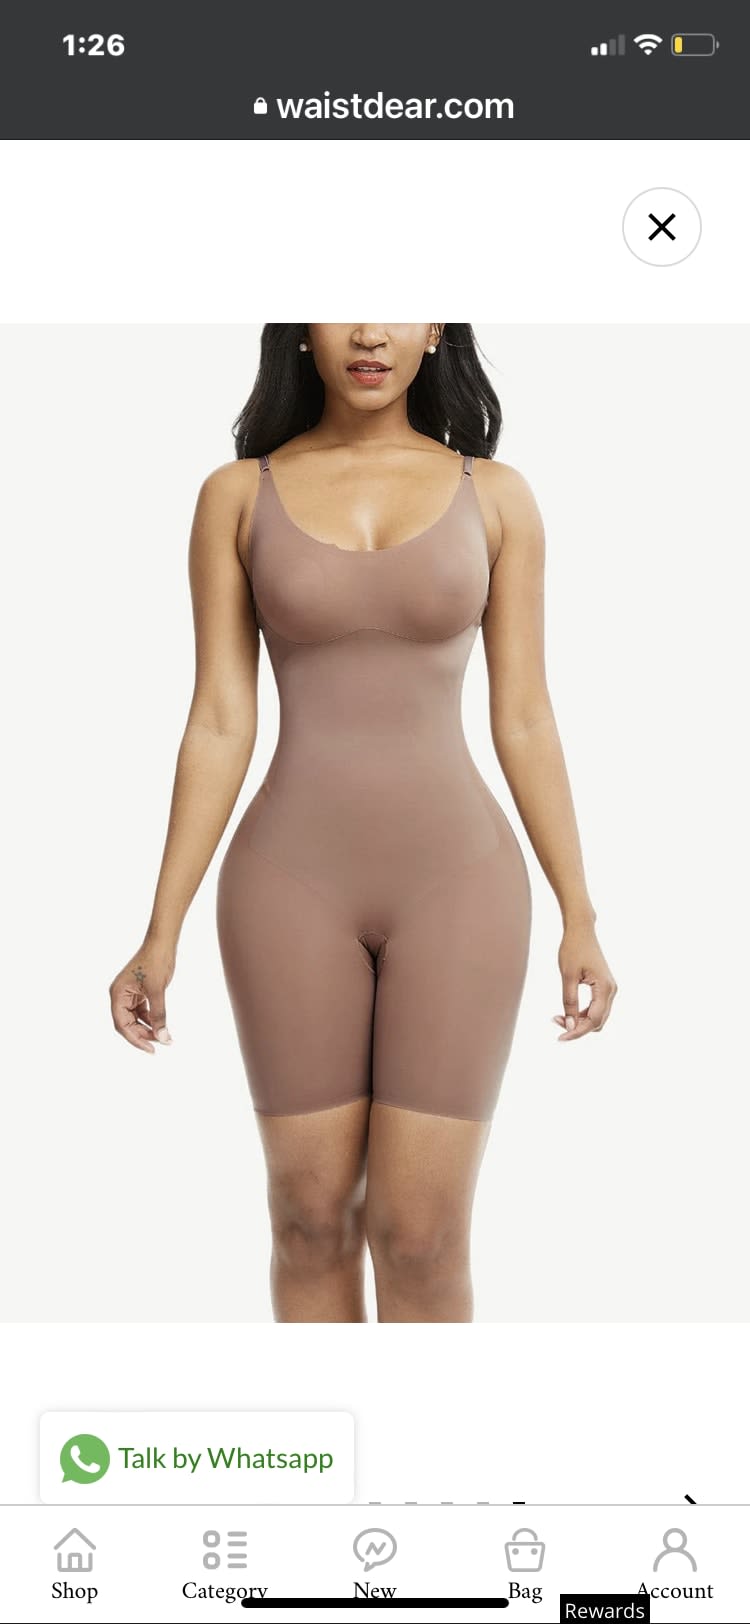 Lightweight Adjustable Straps Body Shaper Tummy Control - Shapers - Dream  Body Contouringg